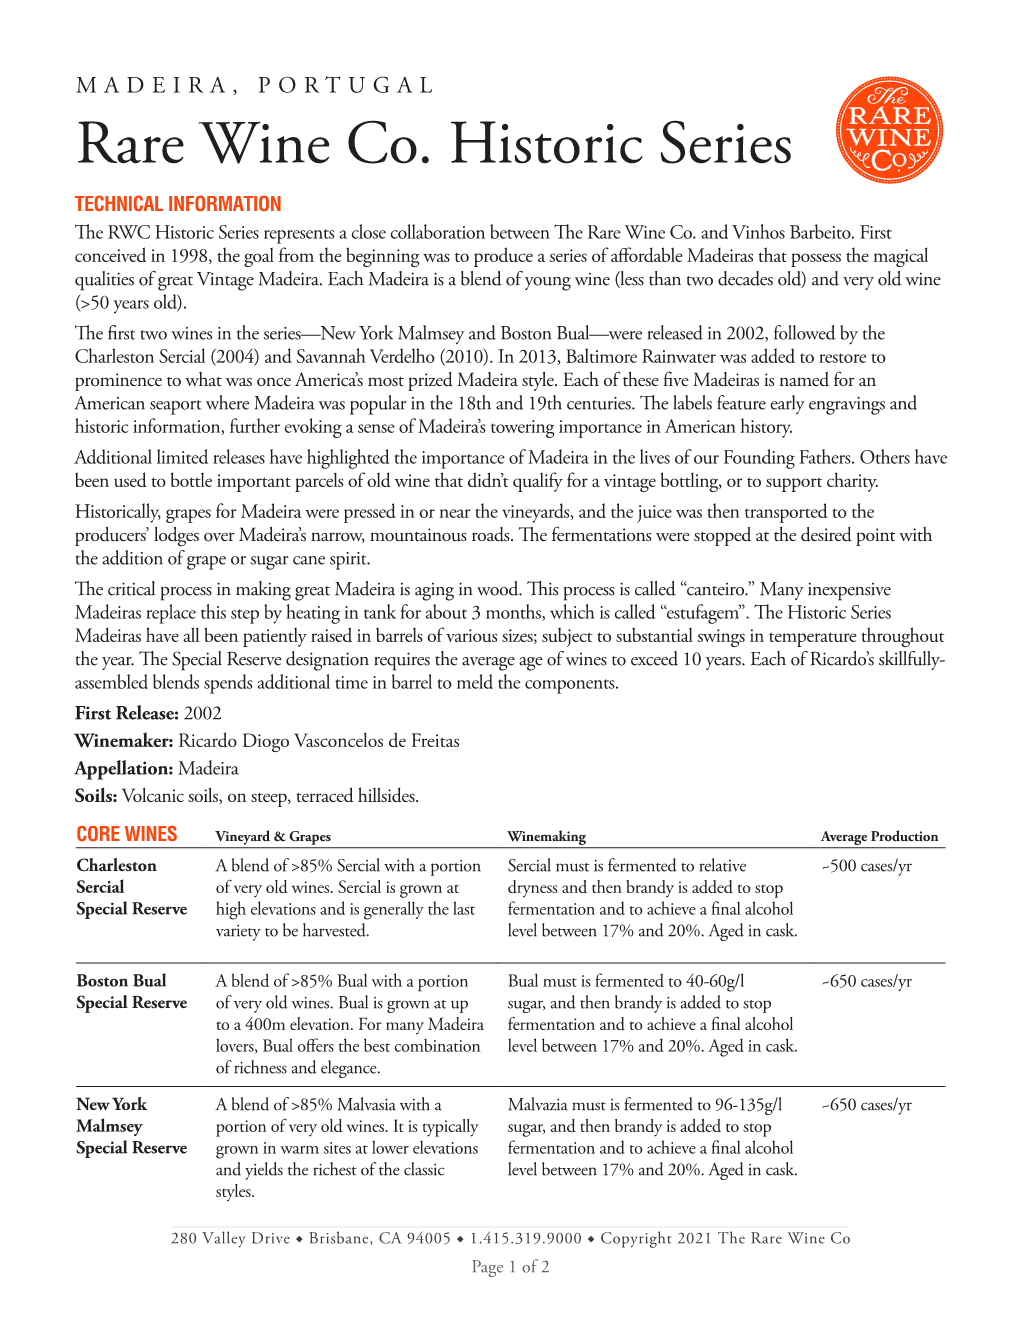 Rare Wine Co. Historic Series TECHNICAL INFORMATION the RWC Historic Series Represents a Close Collaboration Between the Rare Wine Co